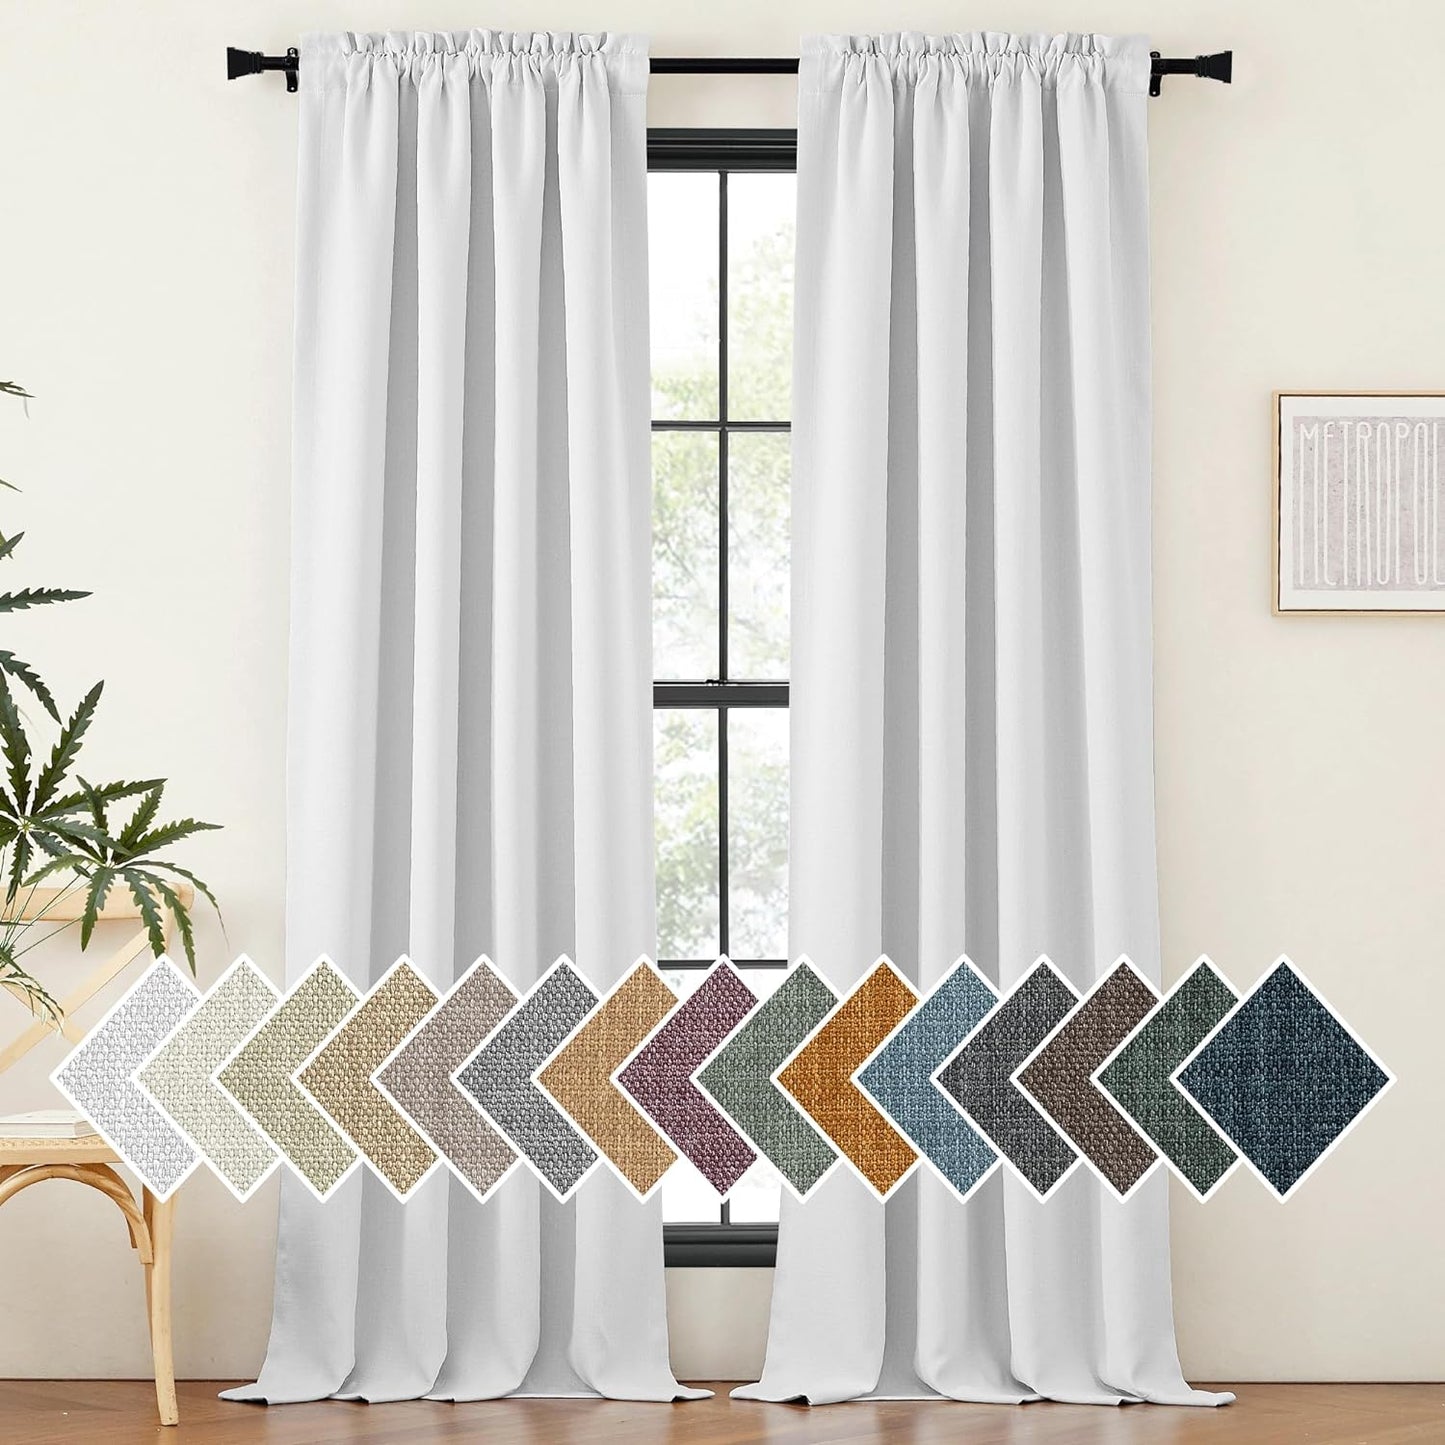 NICETOWN Faux Linen Room Darkening Curtains & Drapes for Living Room, Dual Rod Pockets & Hook Belt Heat/Light Blocking Window Treatments Thermal Drapes for Bedroom, Angora, W52 X L84, 2 Panels  NICETOWN Greyish White W52 X L84 